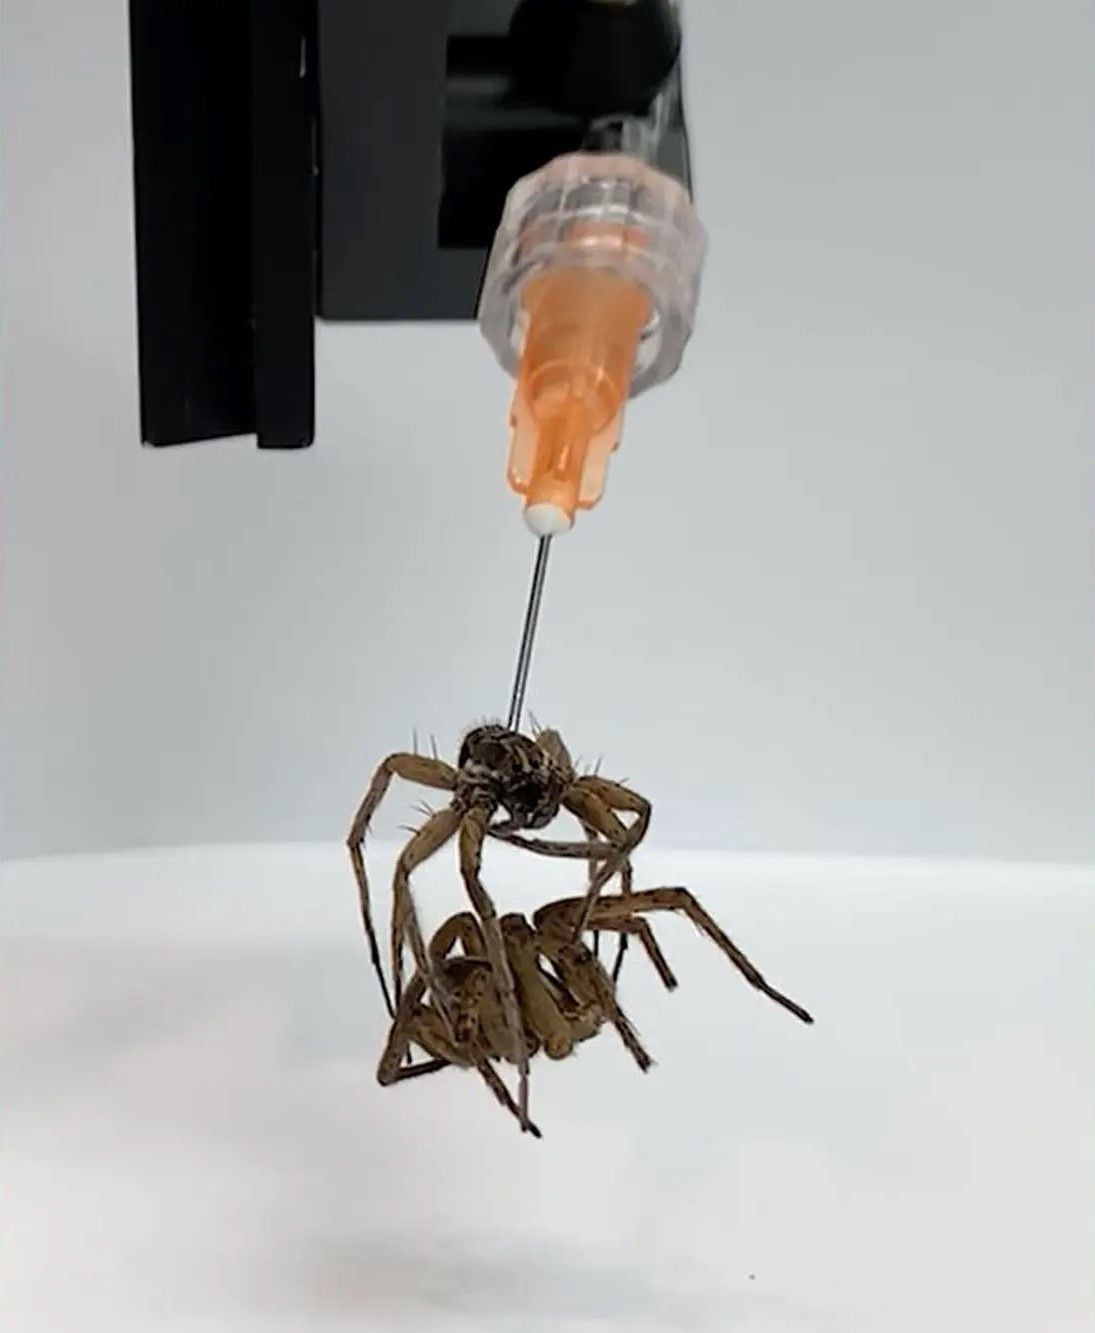 “Technomancer” Scientists Make Robot Zombies Out of Dead Spiders